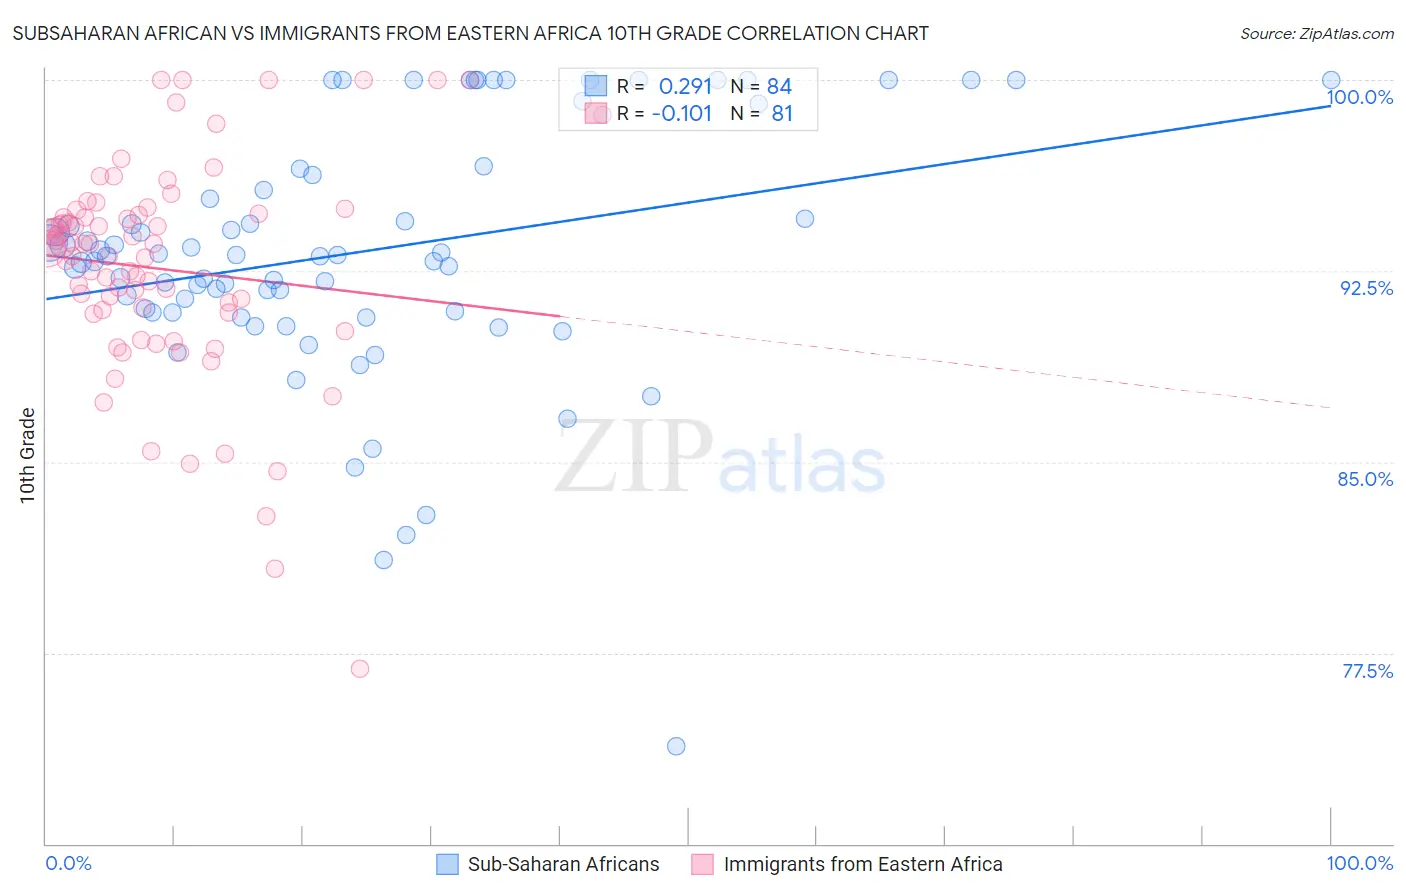 Subsaharan African vs Immigrants from Eastern Africa 10th Grade